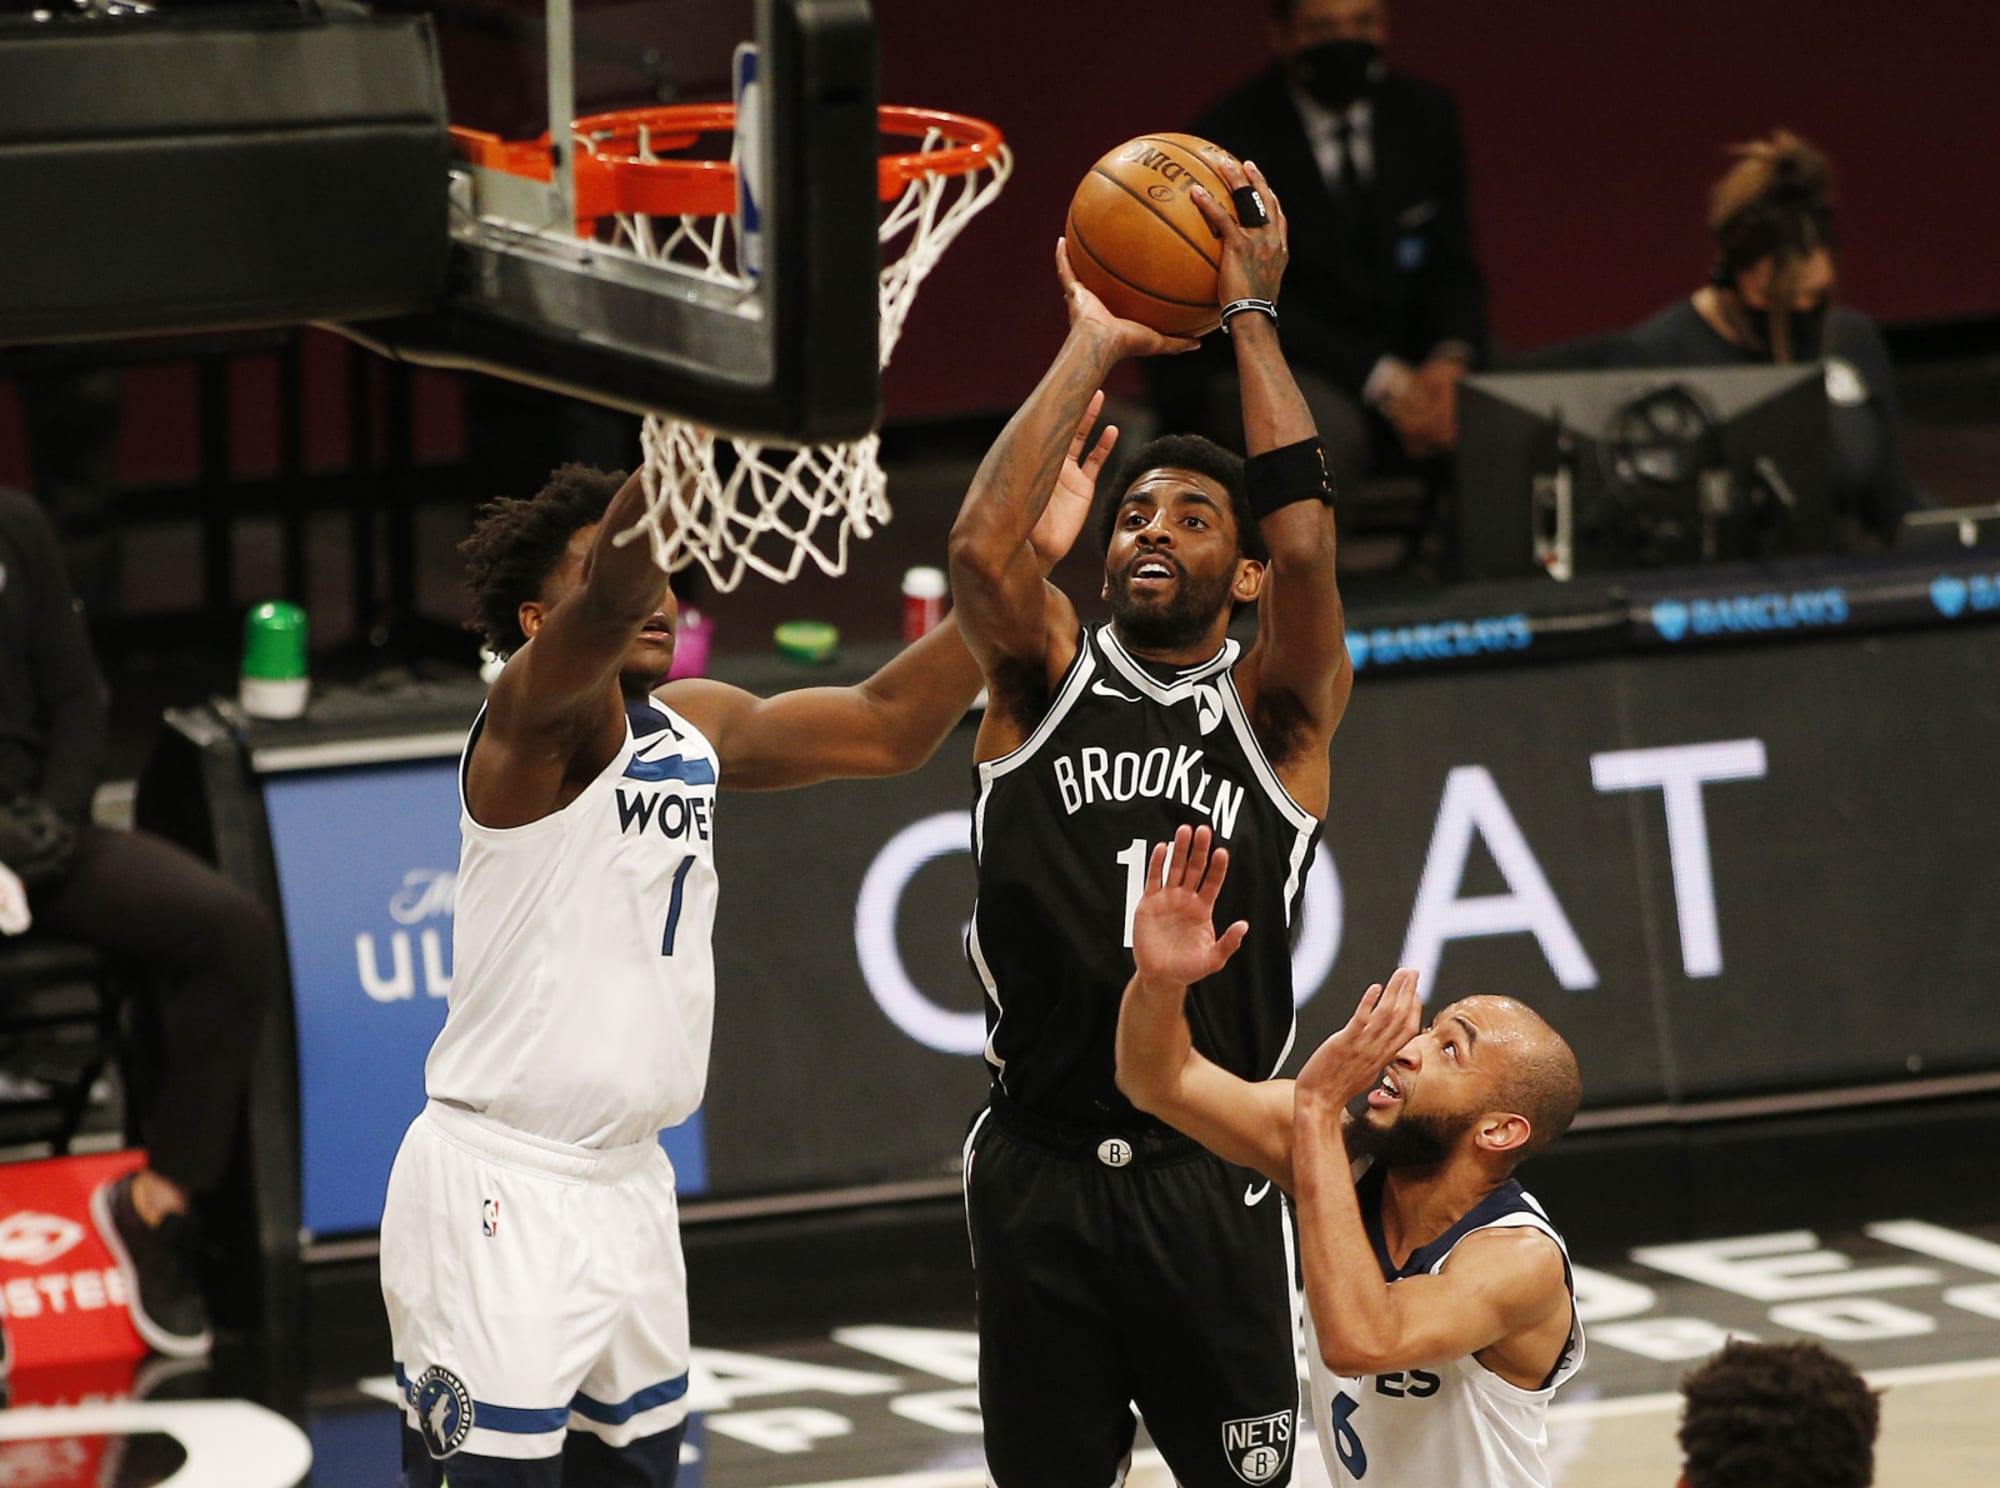 Duke basketball: Kyrie Irving returns to the court for the Brooklyn Nets